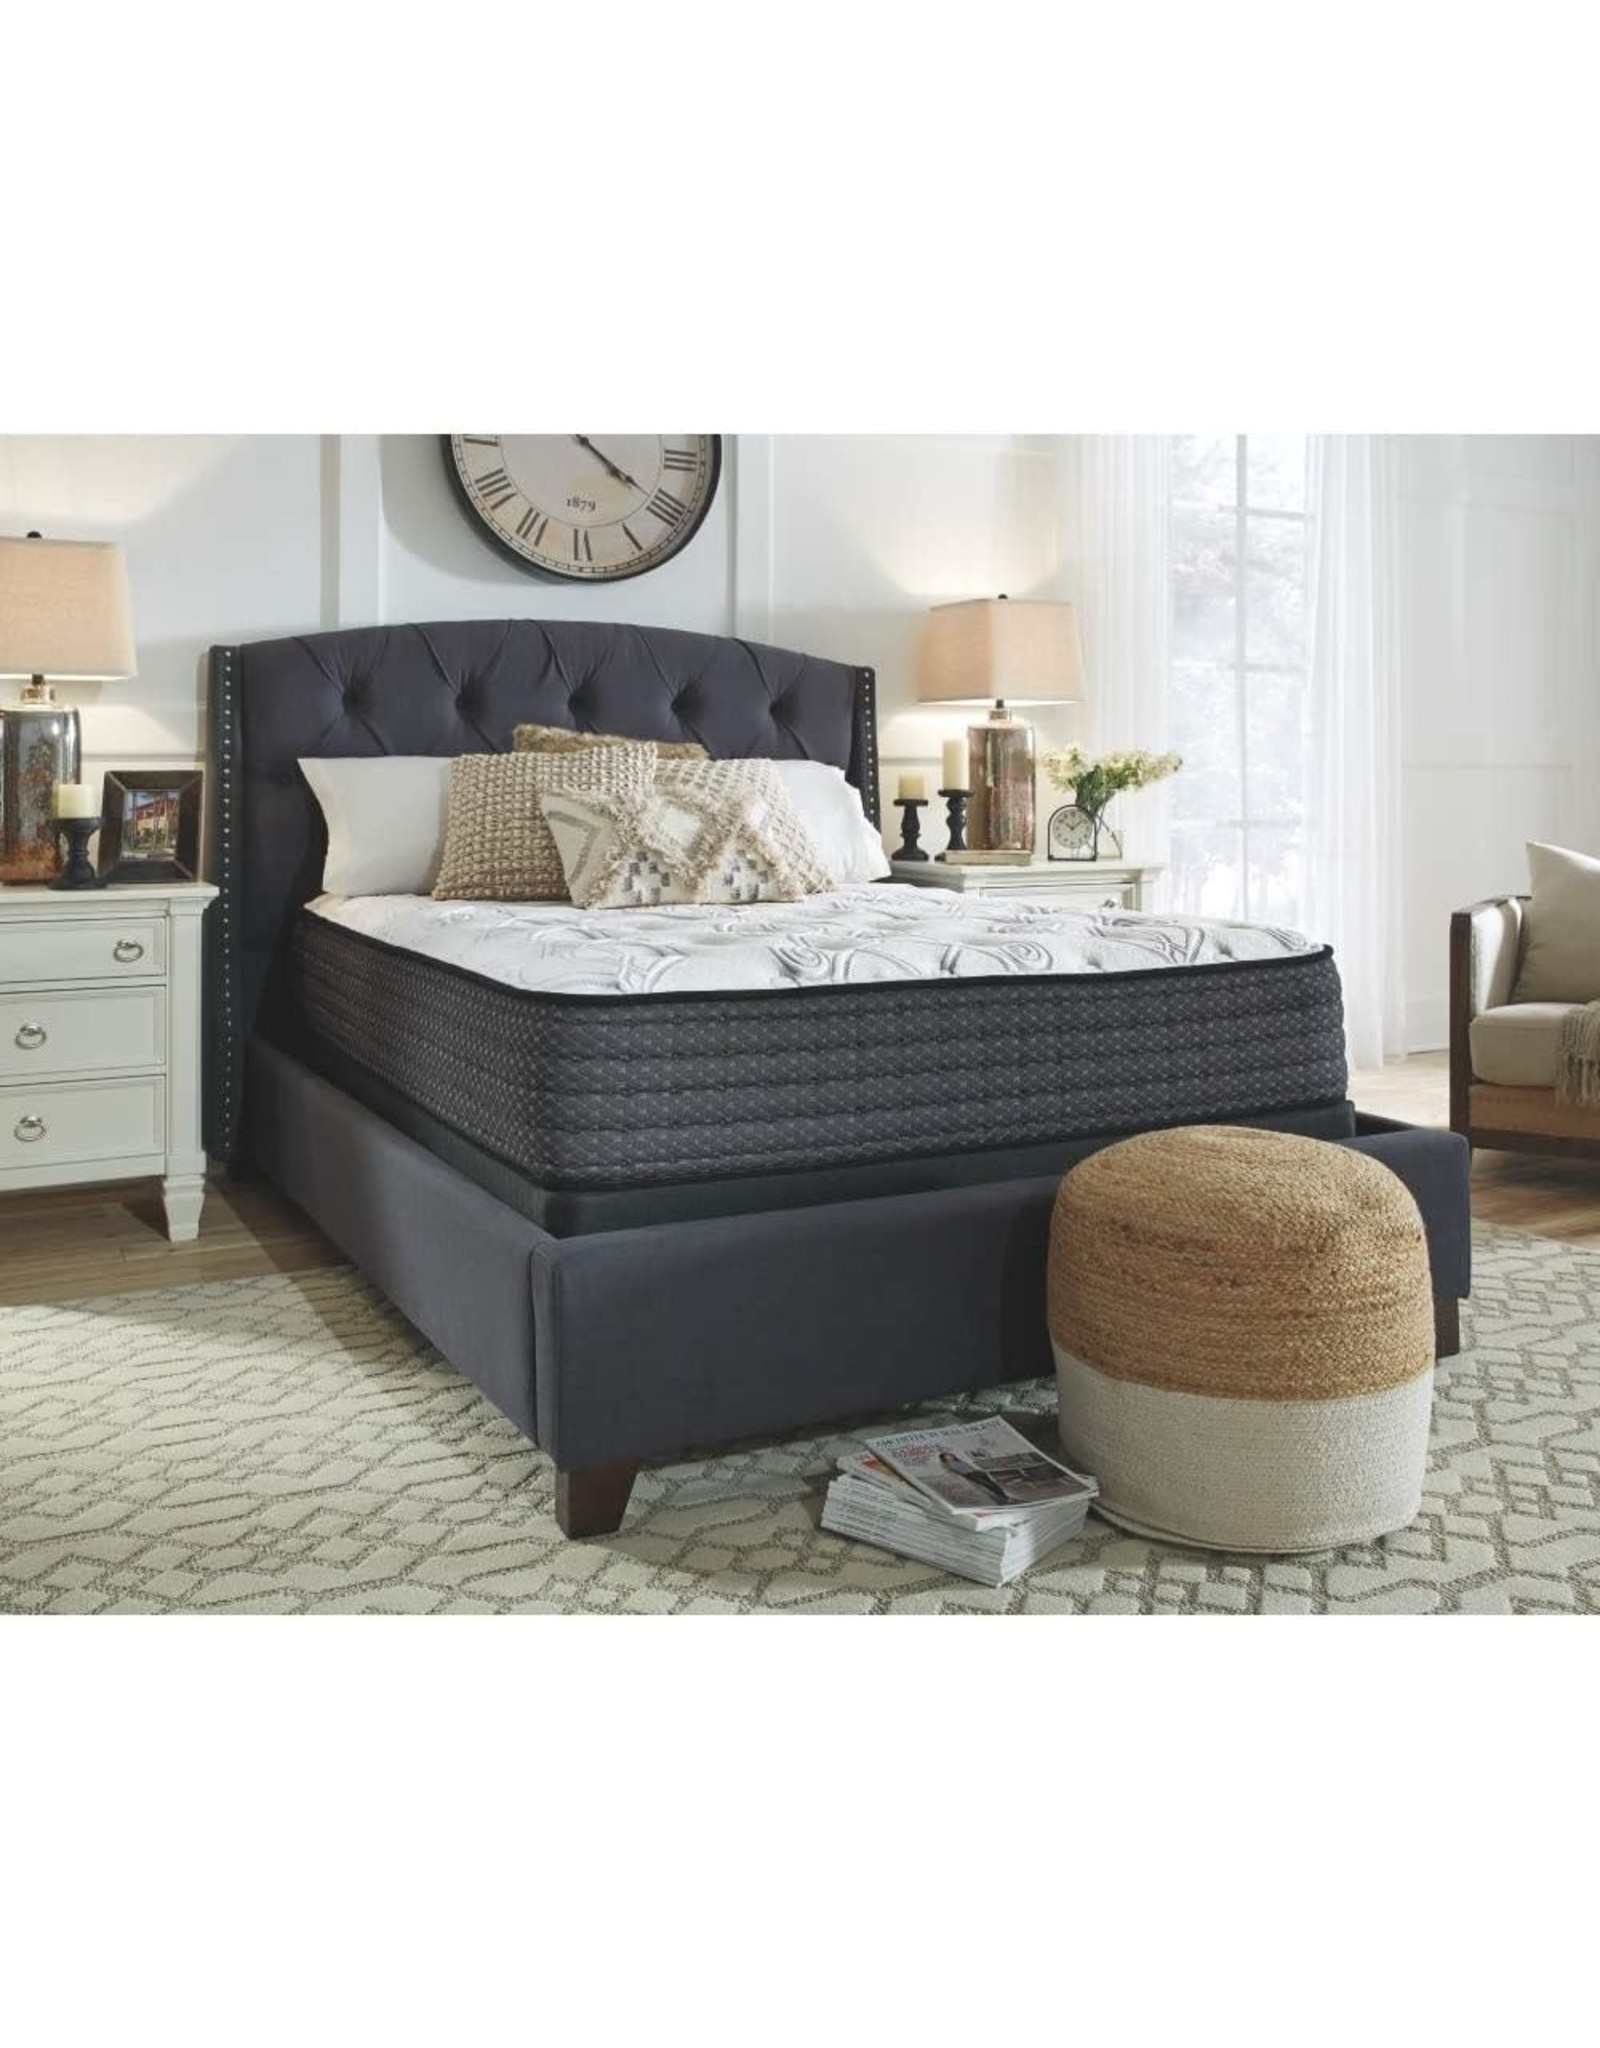 Signature DESIGN BY ASHLEY Limited Edition 11 Inch Firm Hybrid Mattress Queen CertiPUR-US Certified Gel Foam